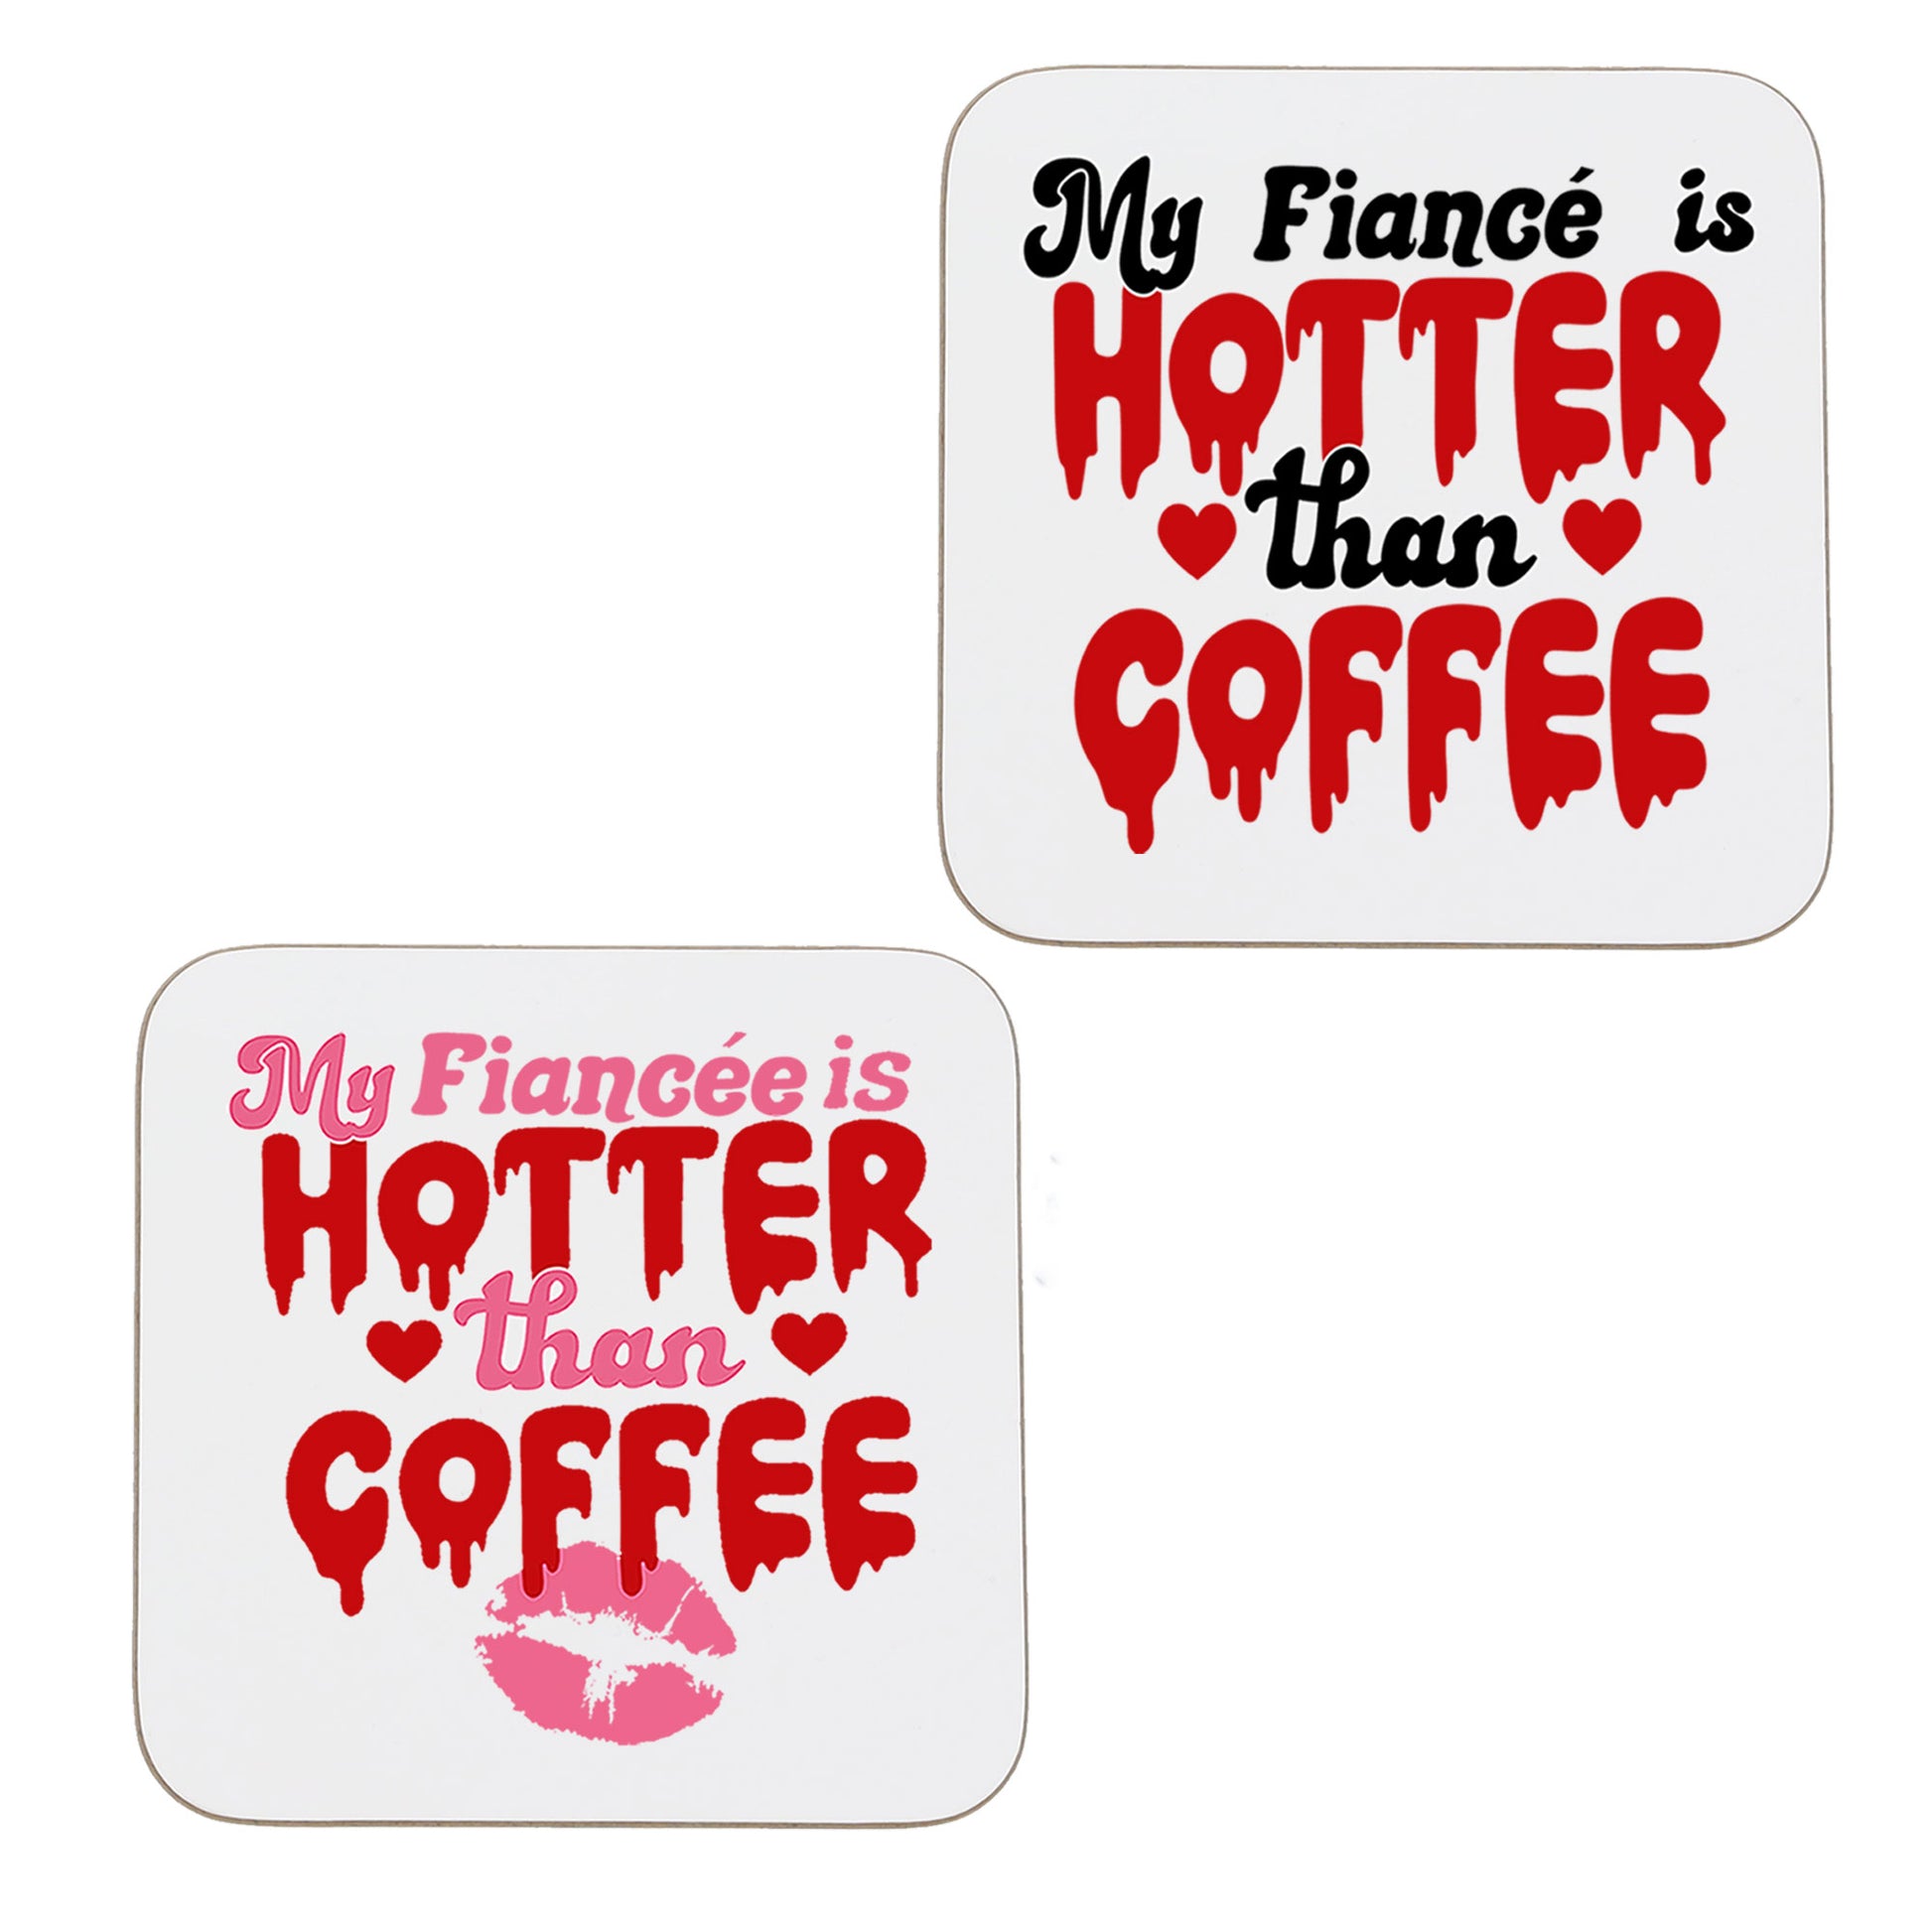 My Fiancé/Fiancée Is Hotter Than Coffee Mug and/or Coaster Gift  - Always Looking Good - Set Of 2 Coasters Only  